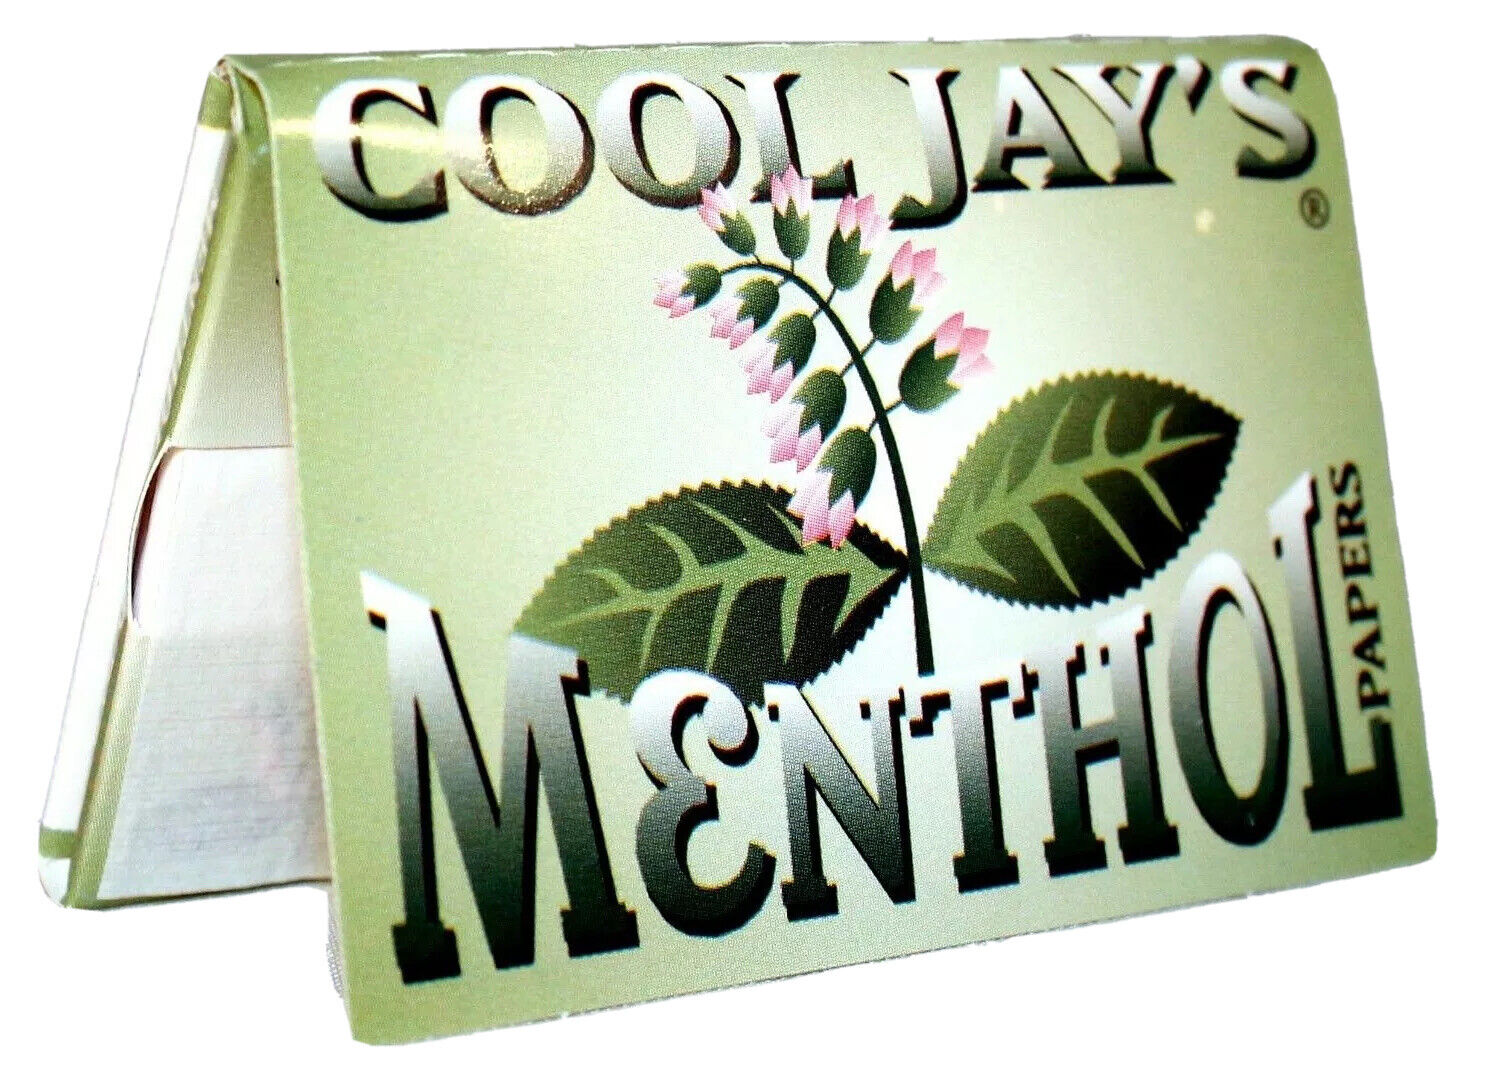 6 Cool Jay's 1.5 menthol mint flavored 1 1/2 cigarette rolling papers booklets